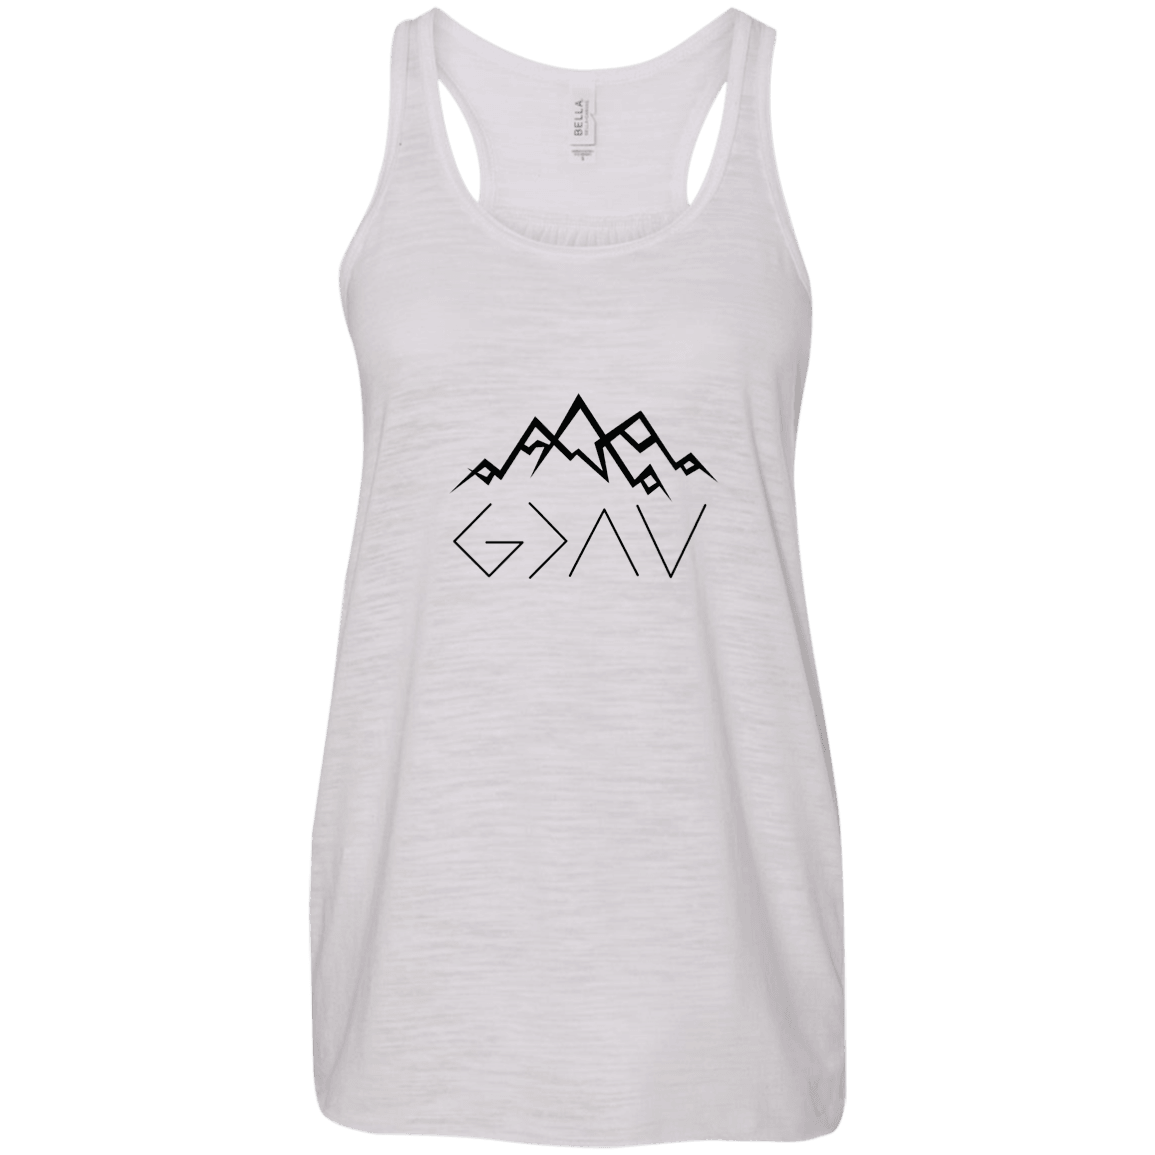 Designs by MyUtopia Shout Out:God is Greater than My Highs and Lows John 16:33 Ladies Flowy Racer-back Tank Top,Vintage White / X-Small,Ladies T-Shirts